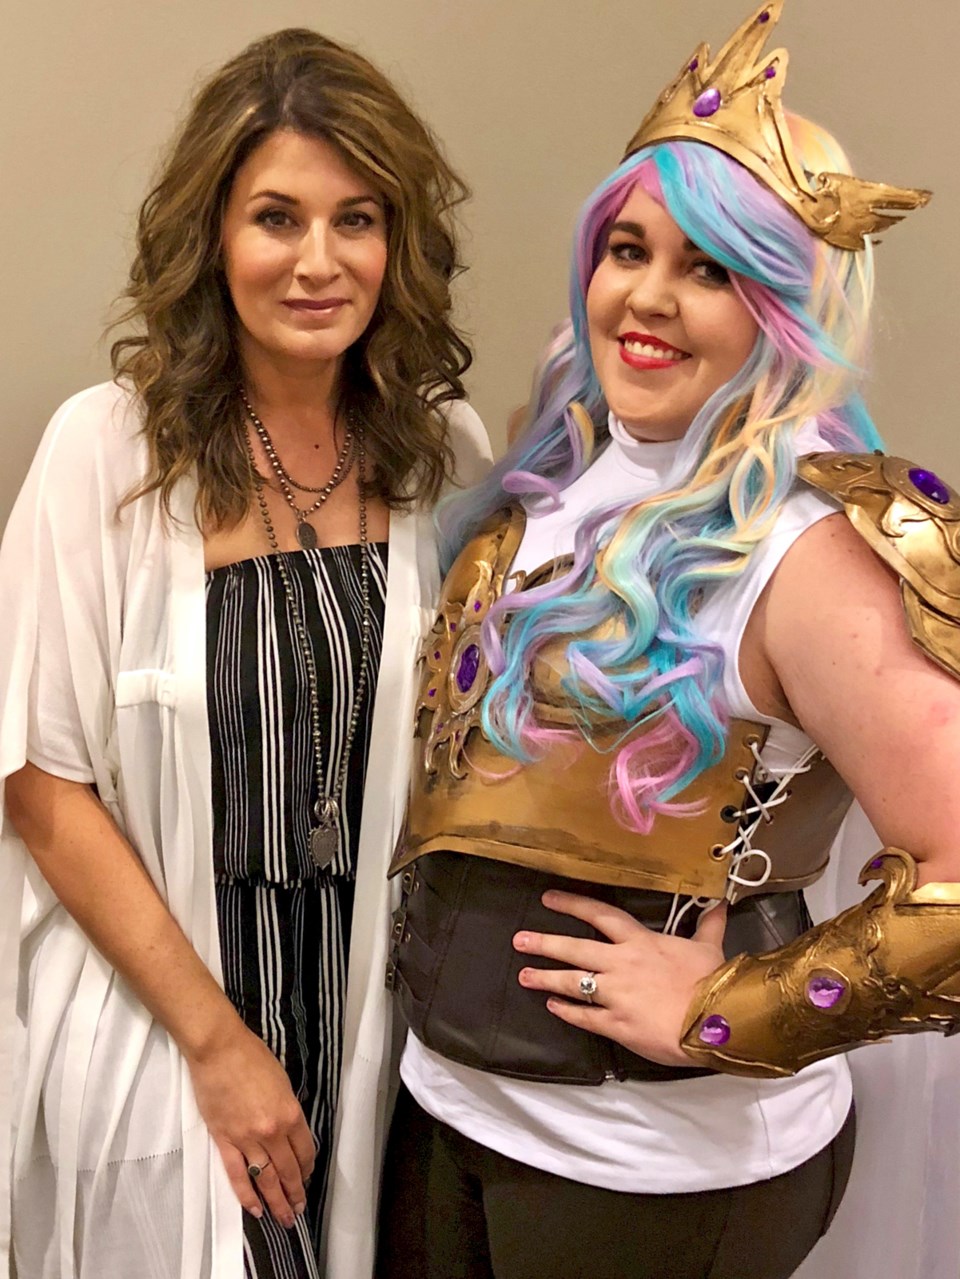 My Little Pony: Friendship is Magic voice actor Nicole Oliver with one of her many adoring fans.